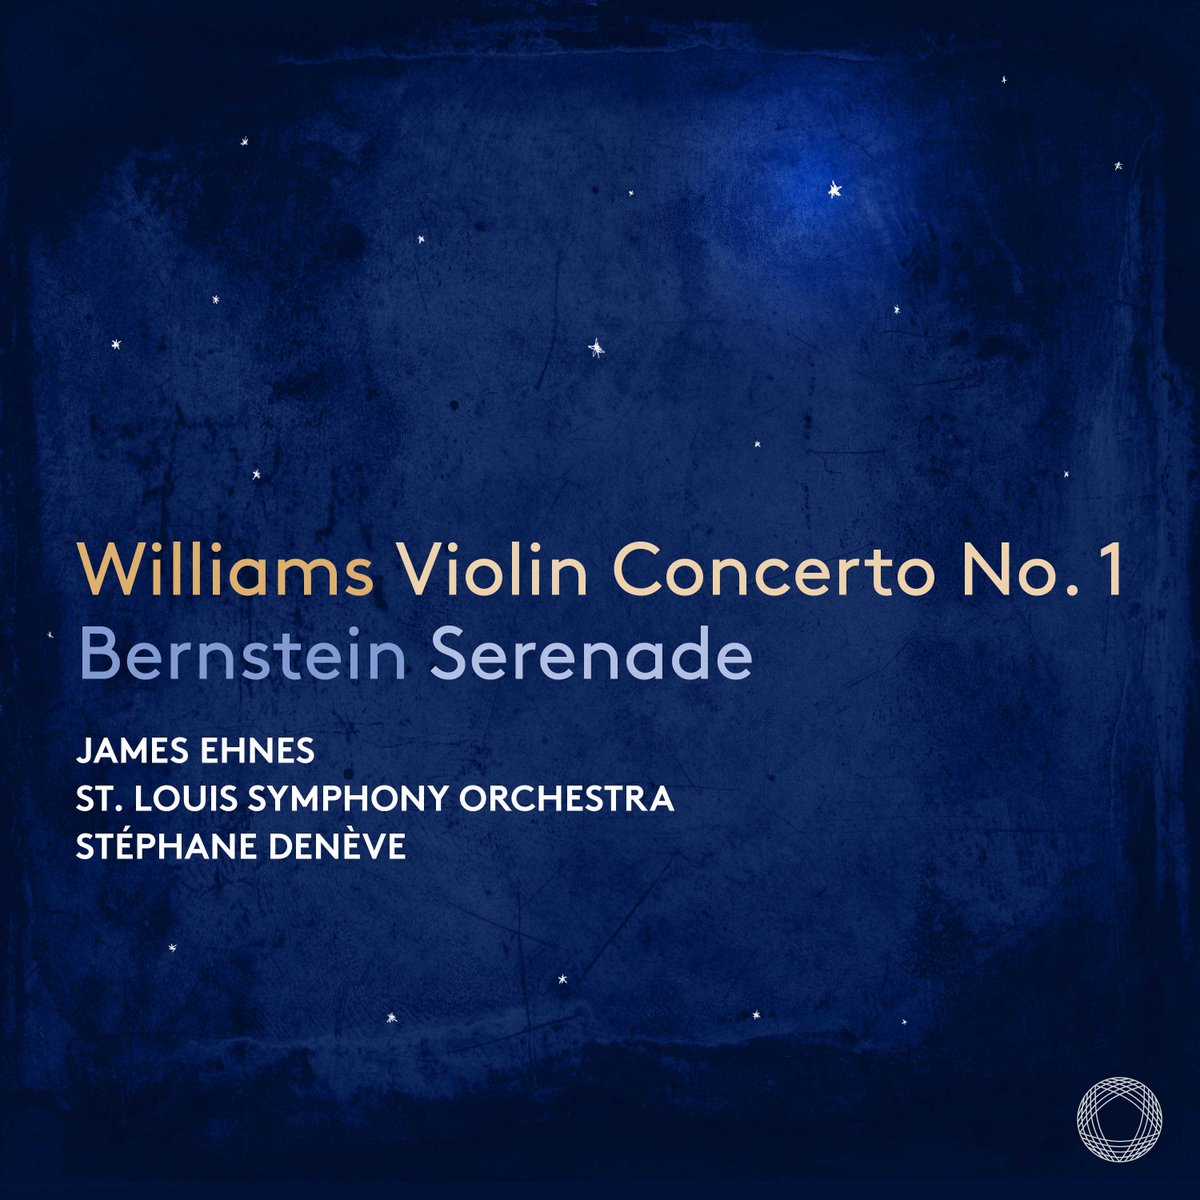 .@JamesEhnes was featured on the latest episode of the @GramophoneMag podcast with Martin Cullingford. James and Martin spoke about his recent release with @slso & Stéphane Denève - Williams: Violin Concerto No. 1 & Bernstein: Serenade. Explore here: 🔗bit.ly/4dlzHhO